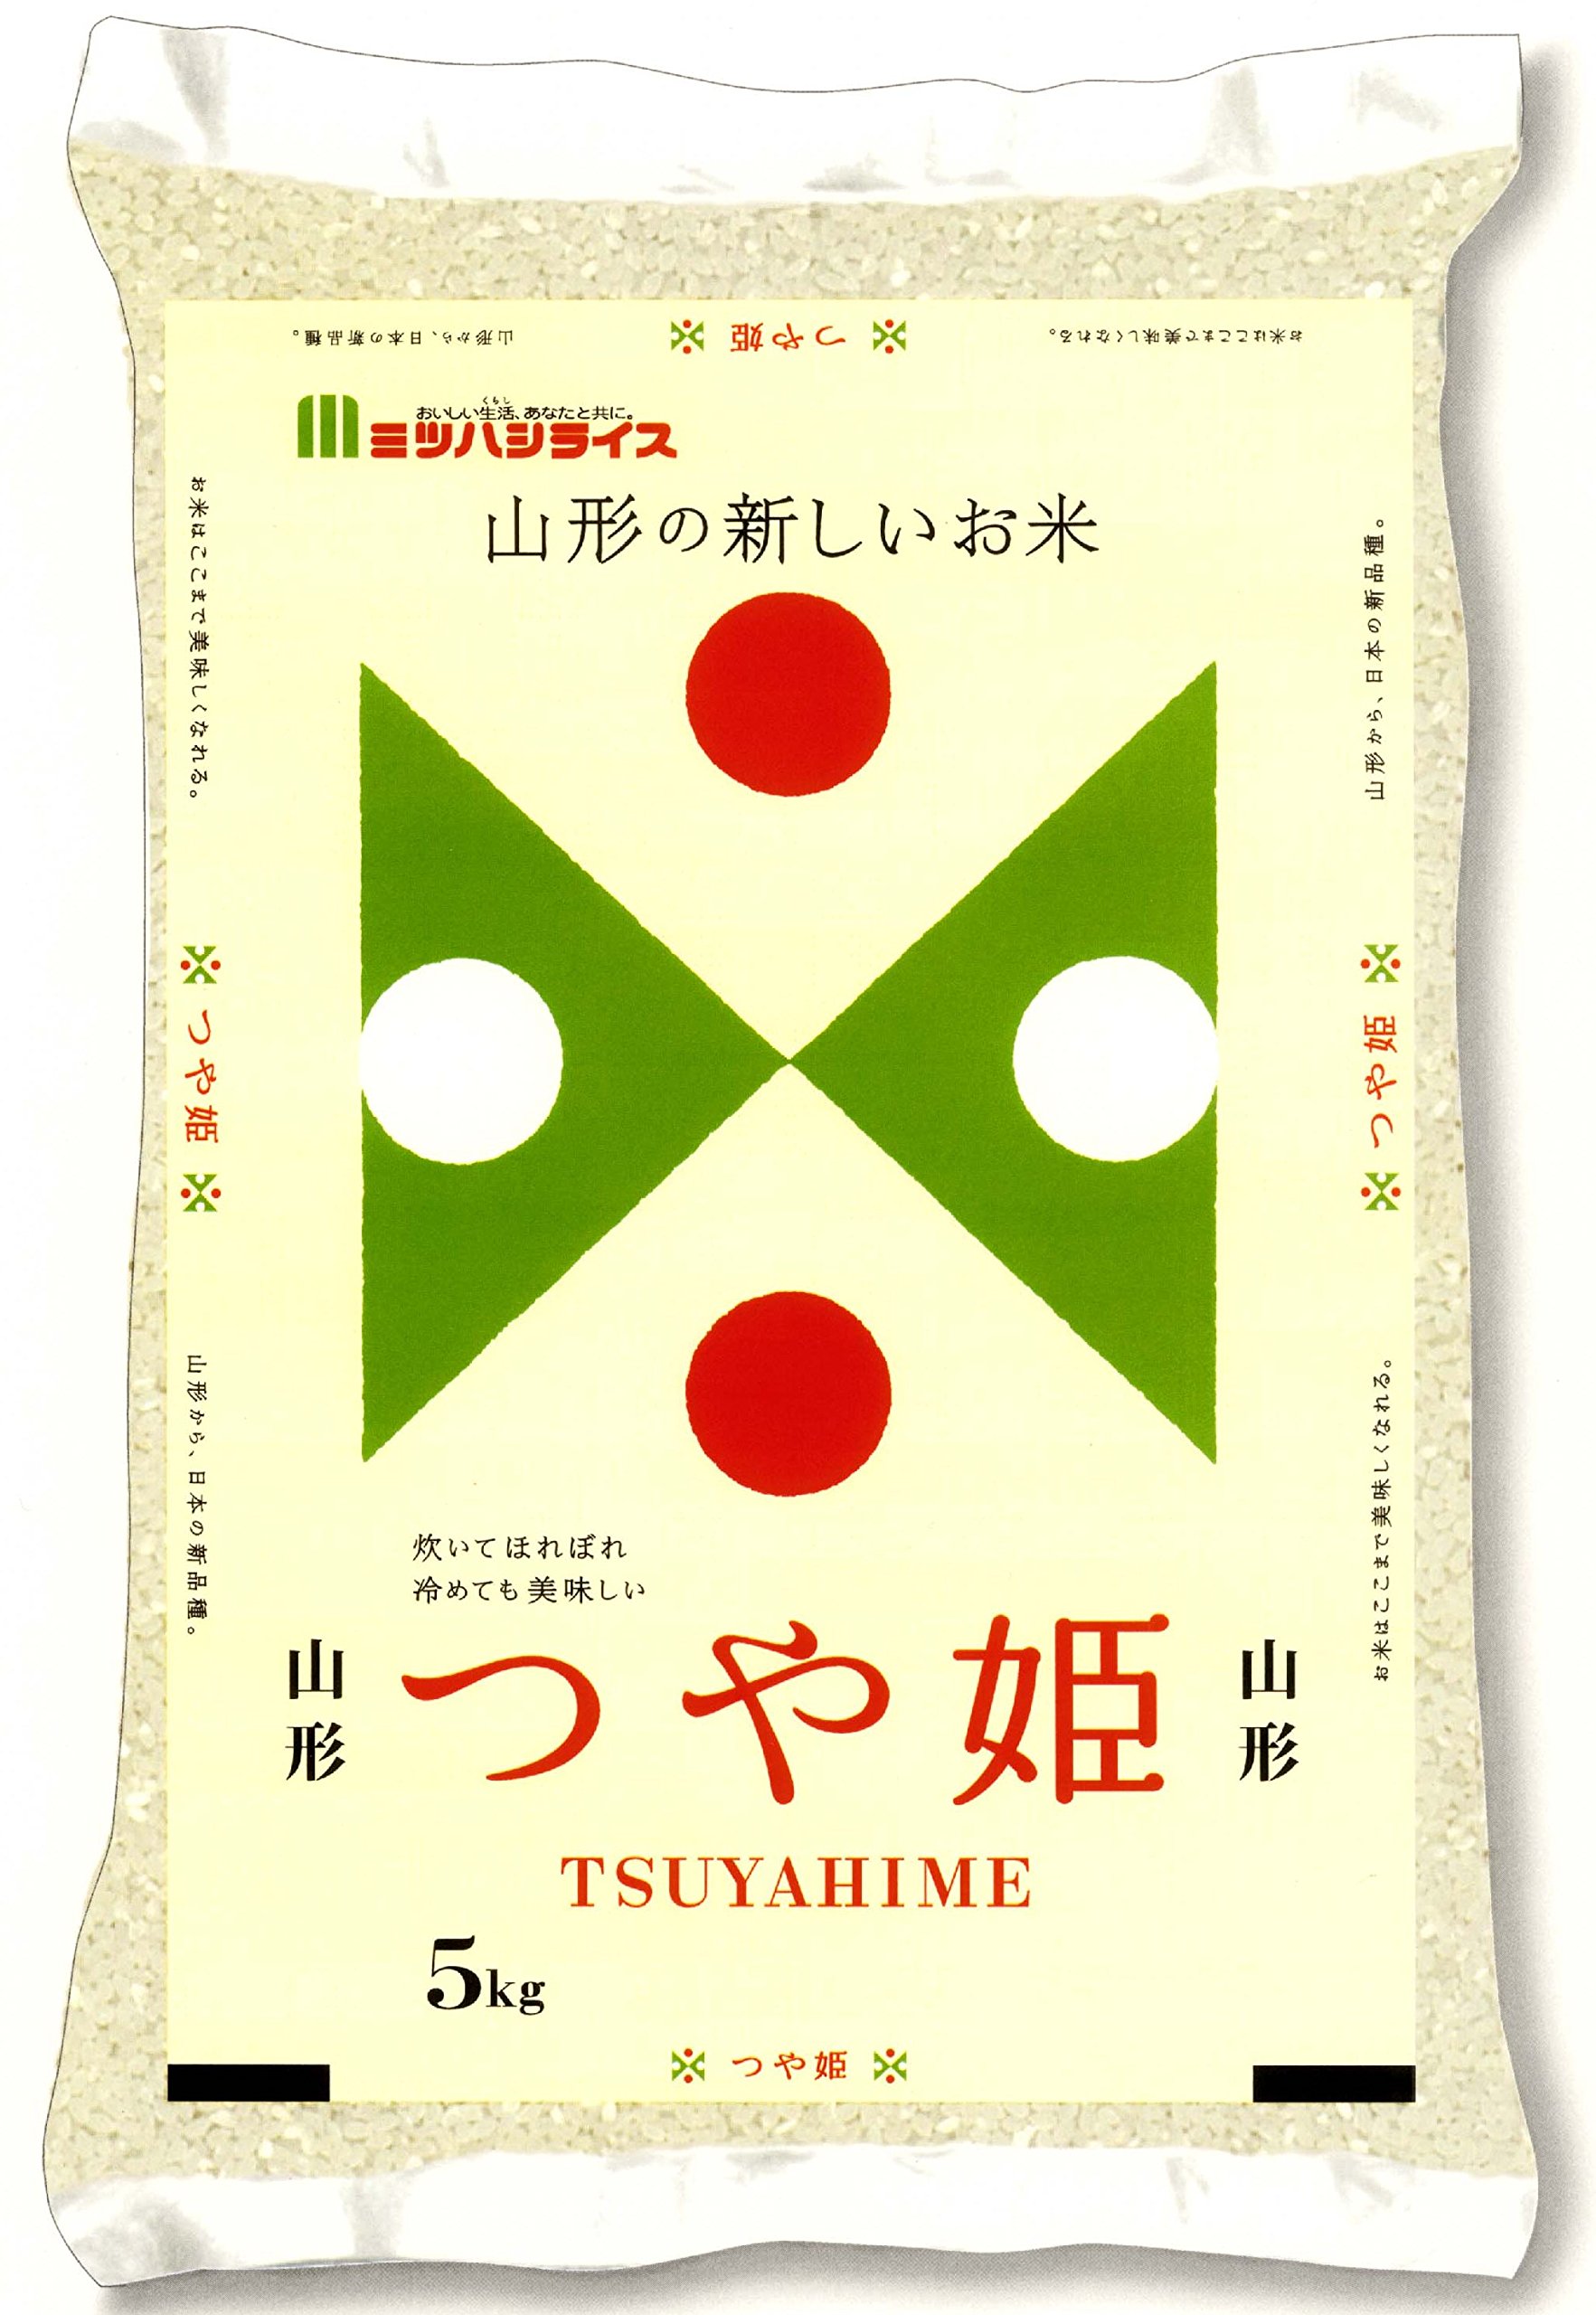 Top in Japan Ranking - Kijima Tsuyahime Yamagata Rice, つや姫 山形県おきたま産, Milled Short Grain Rice, Supremely Pure And Delicious Special Rice, Extremely ...